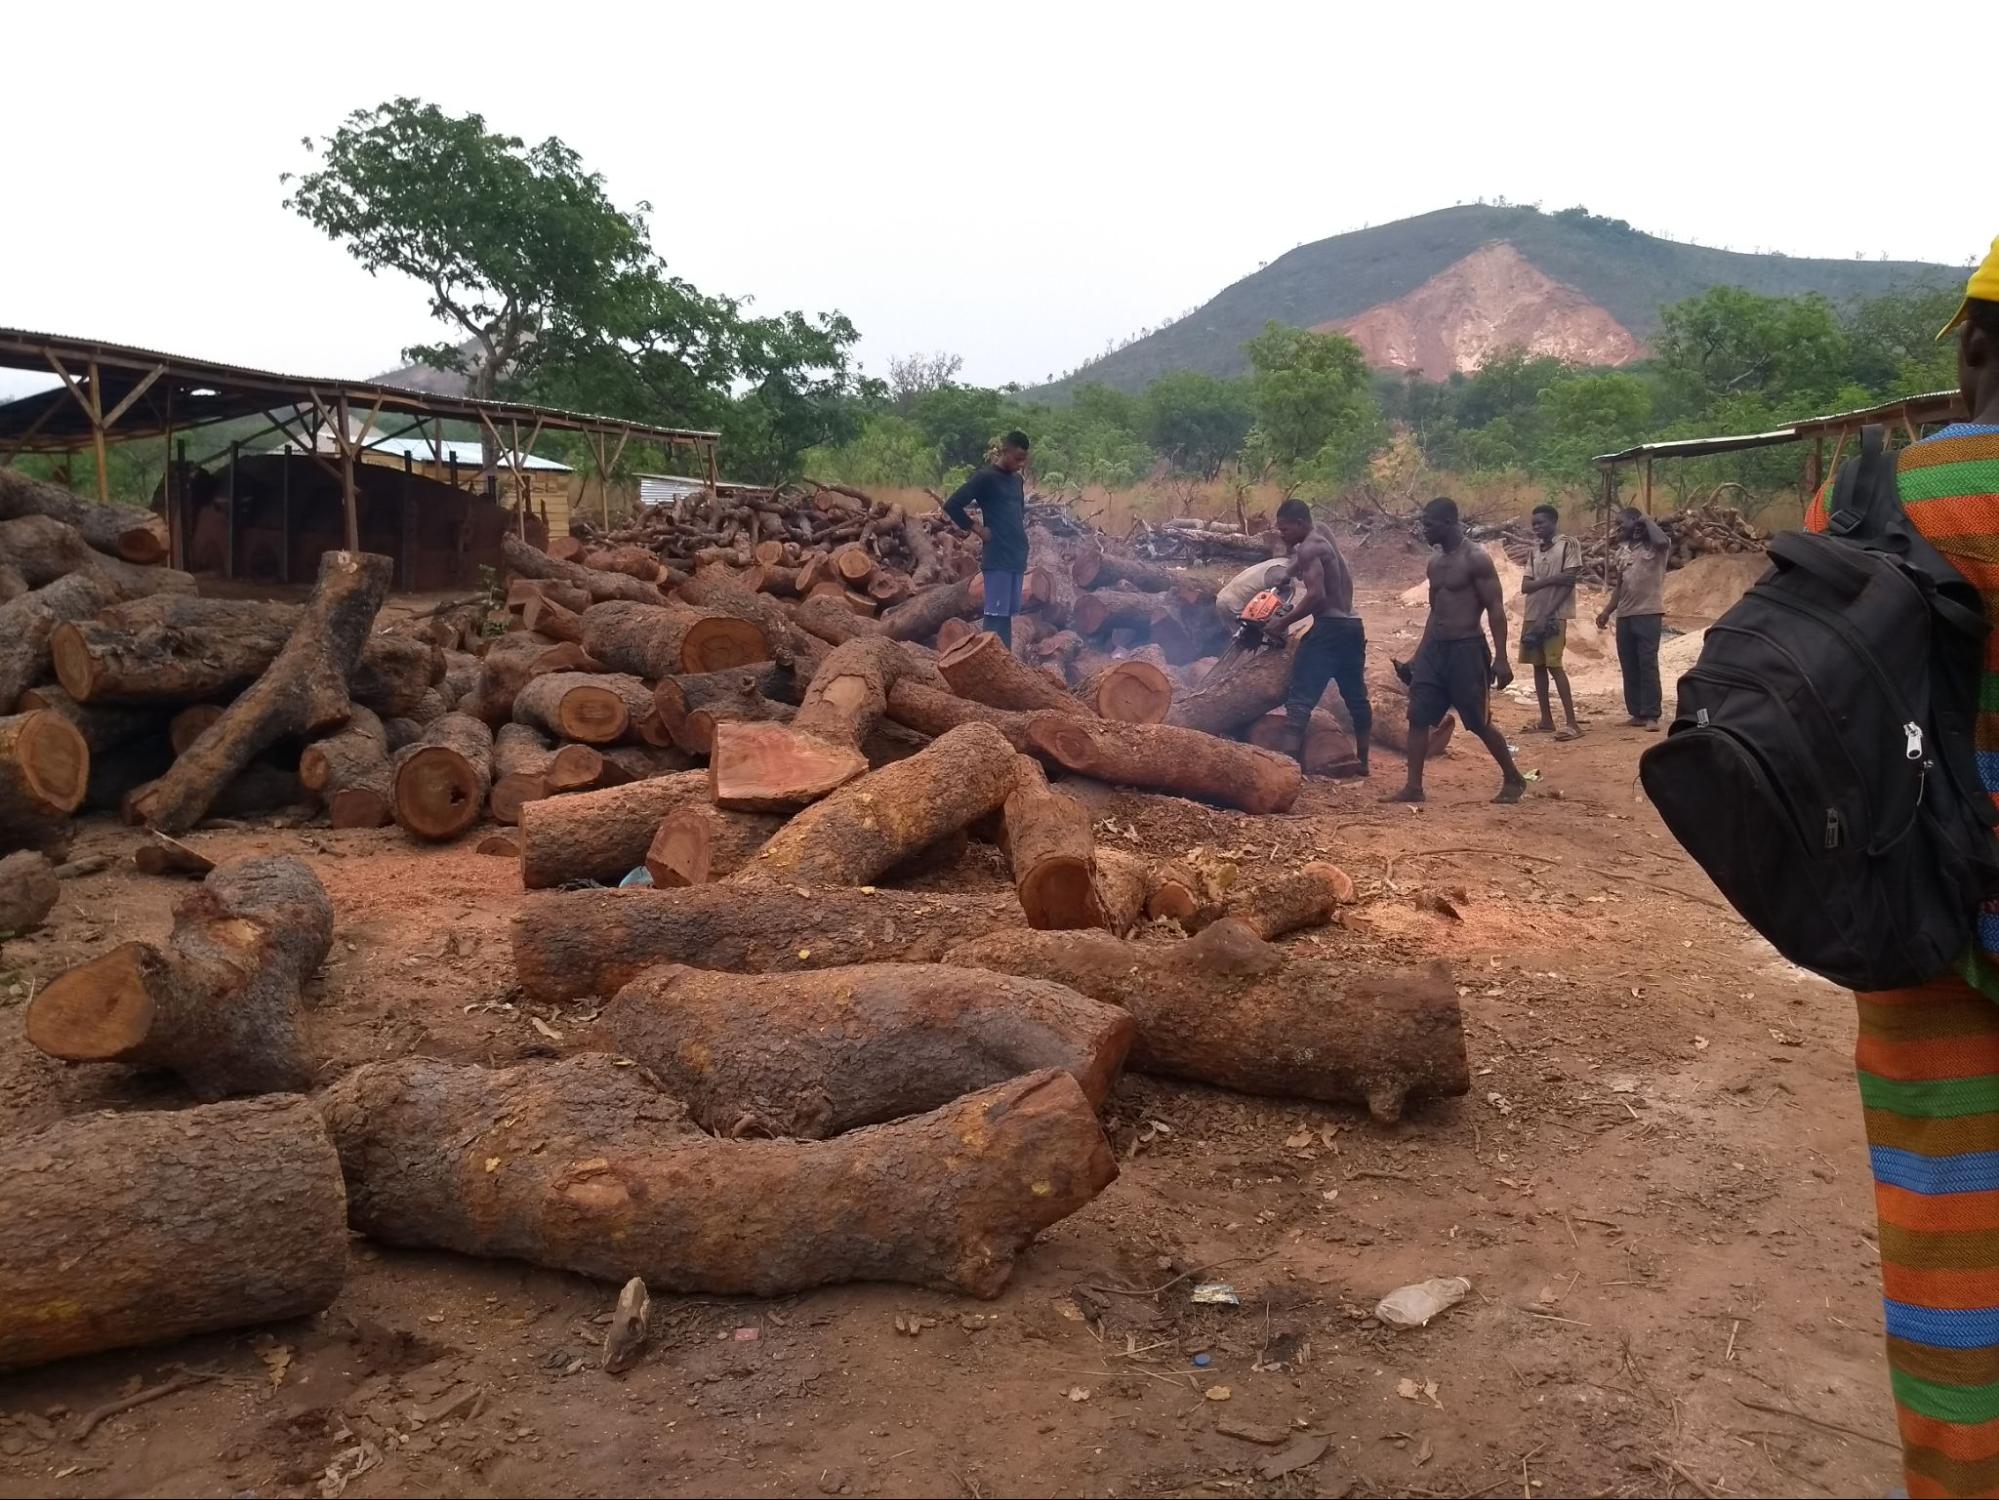  Logs of hardwood are cut to fit inside brick ovens at the charcoal factory in Obimo